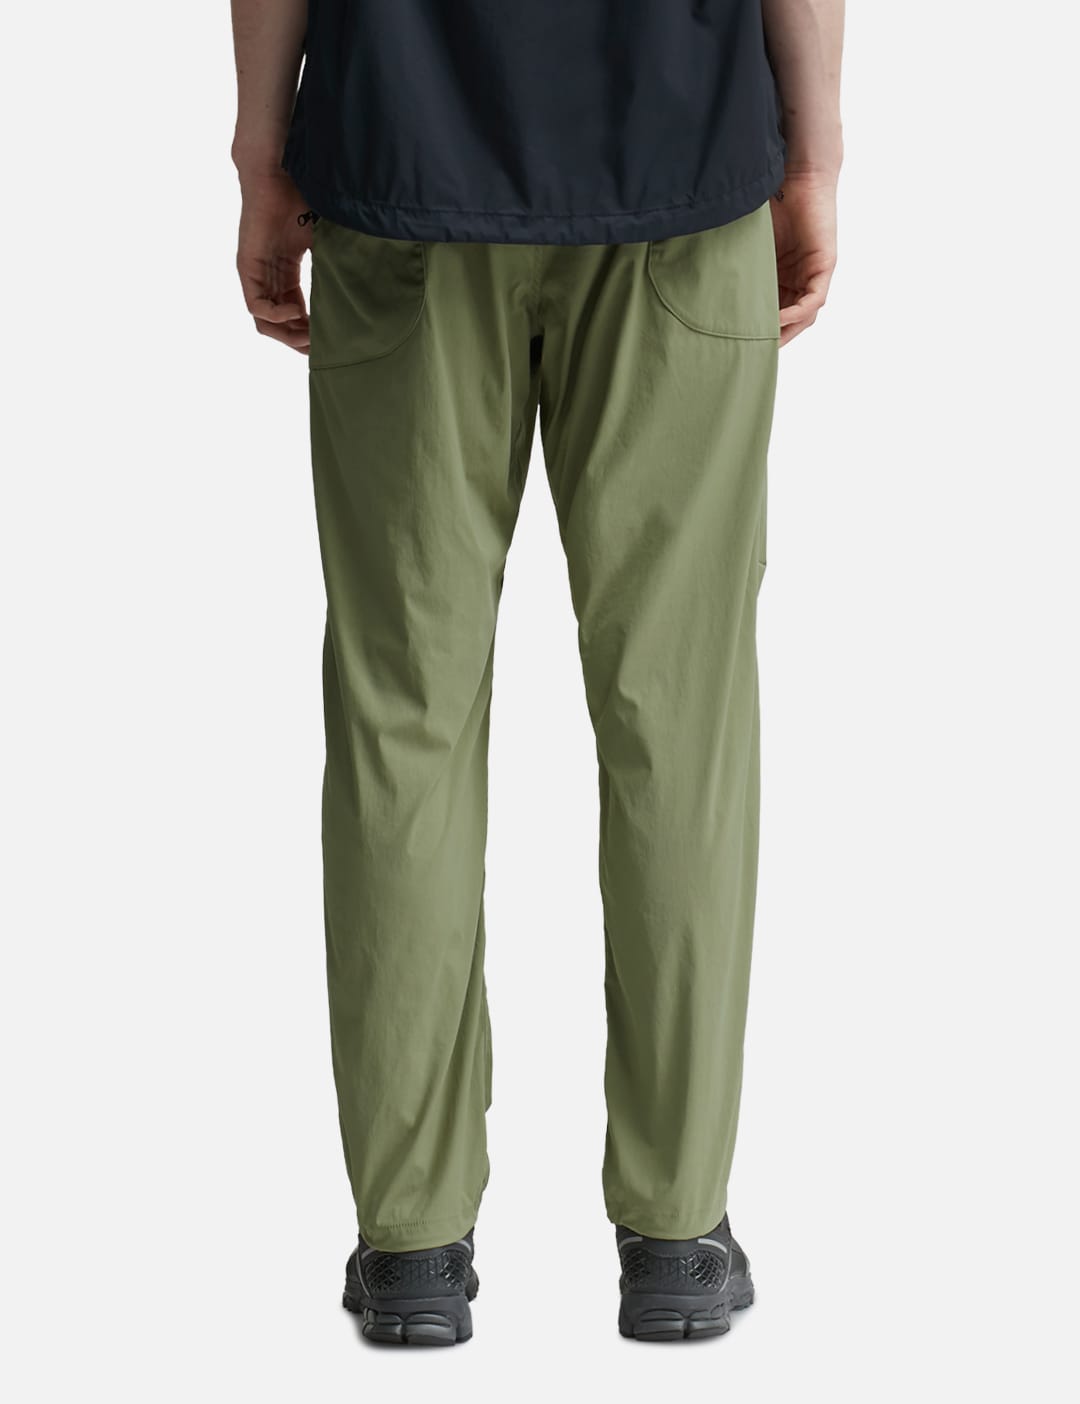 CAYL - 8 Pocket Hiking Pants | HBX - Globally Curated Fashion and